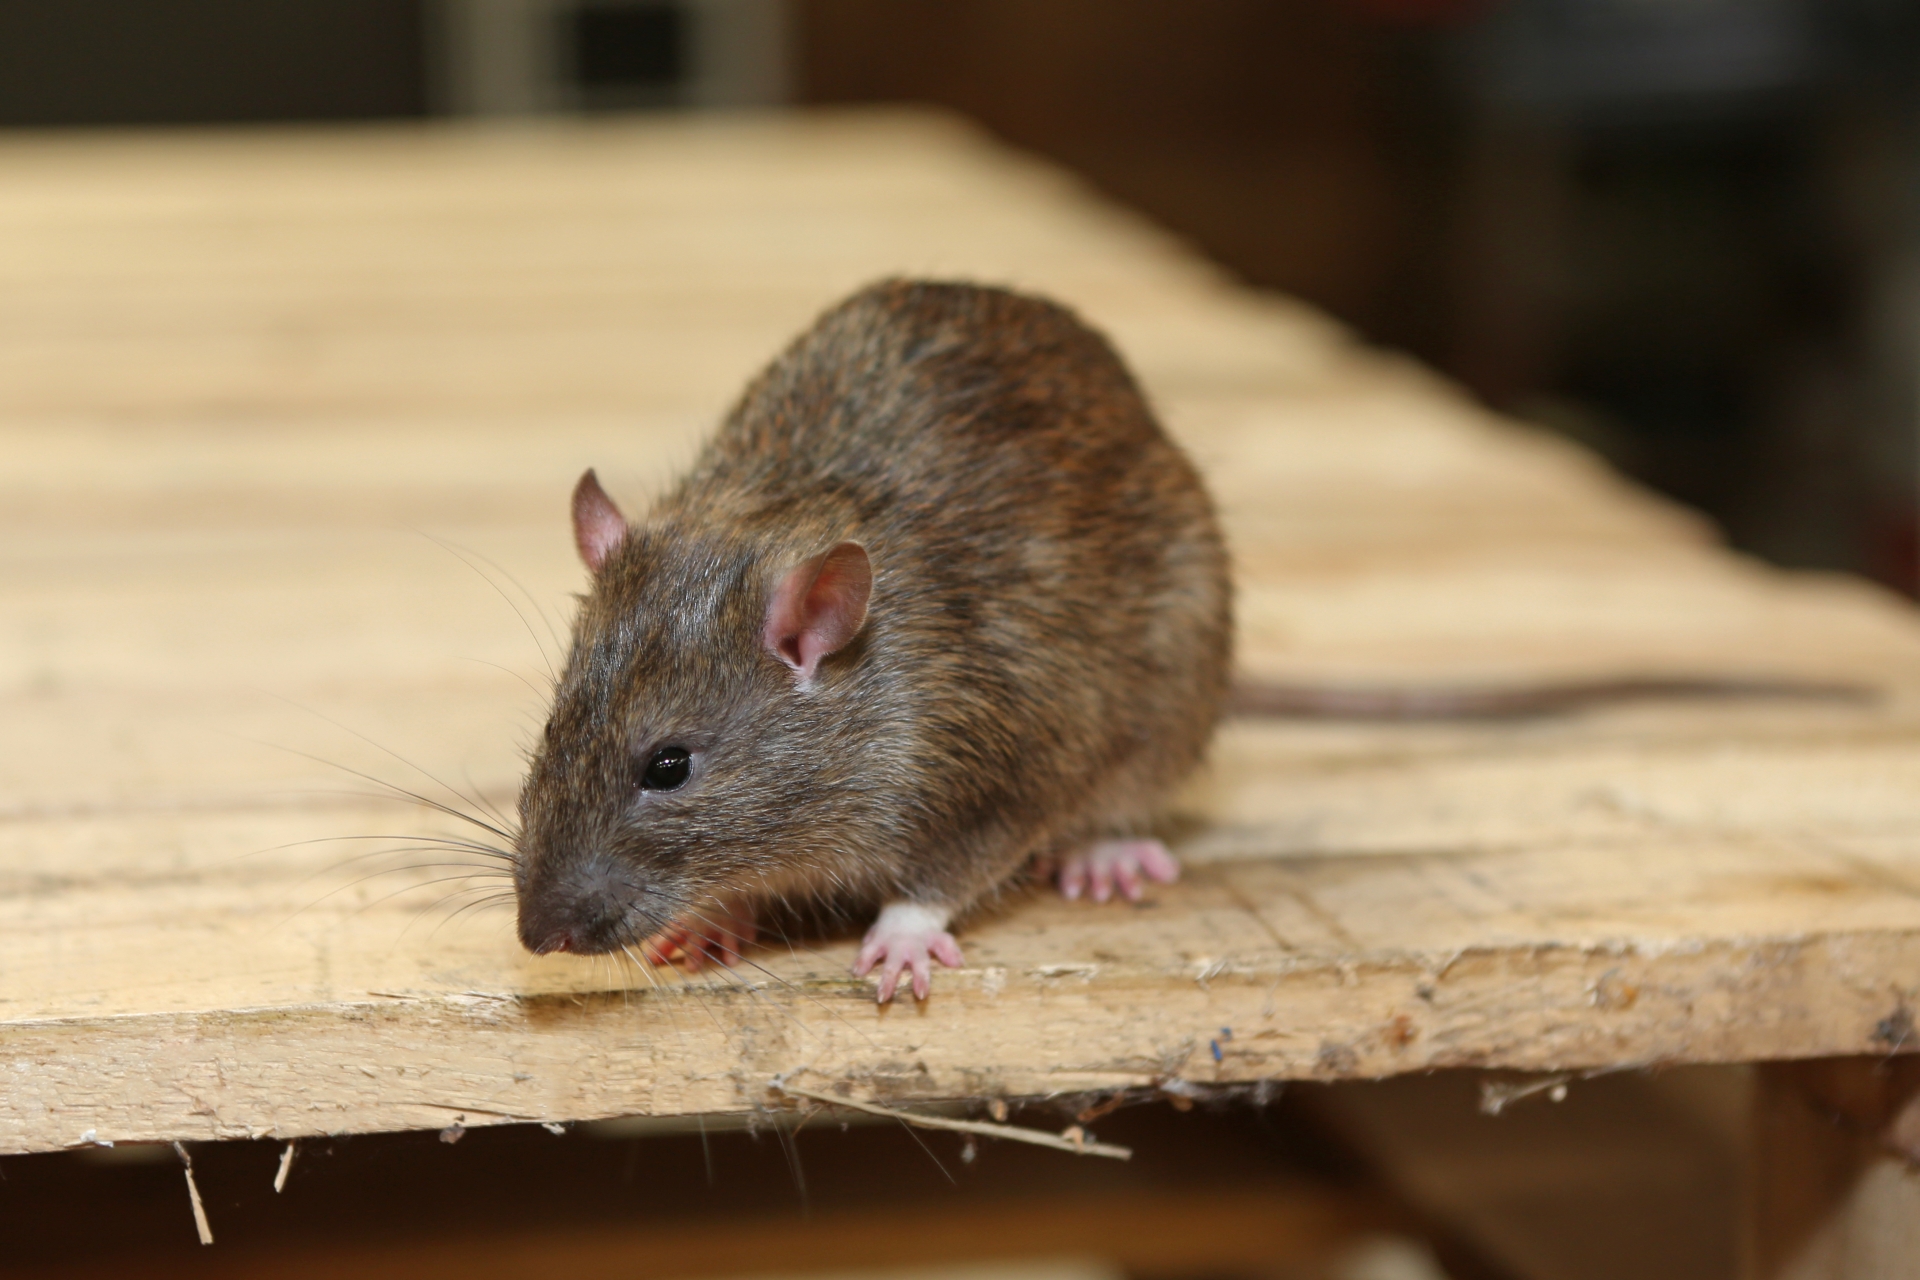 Rat Control, Pest Control in Deptford, SE8. Call Now 020 8166 9746